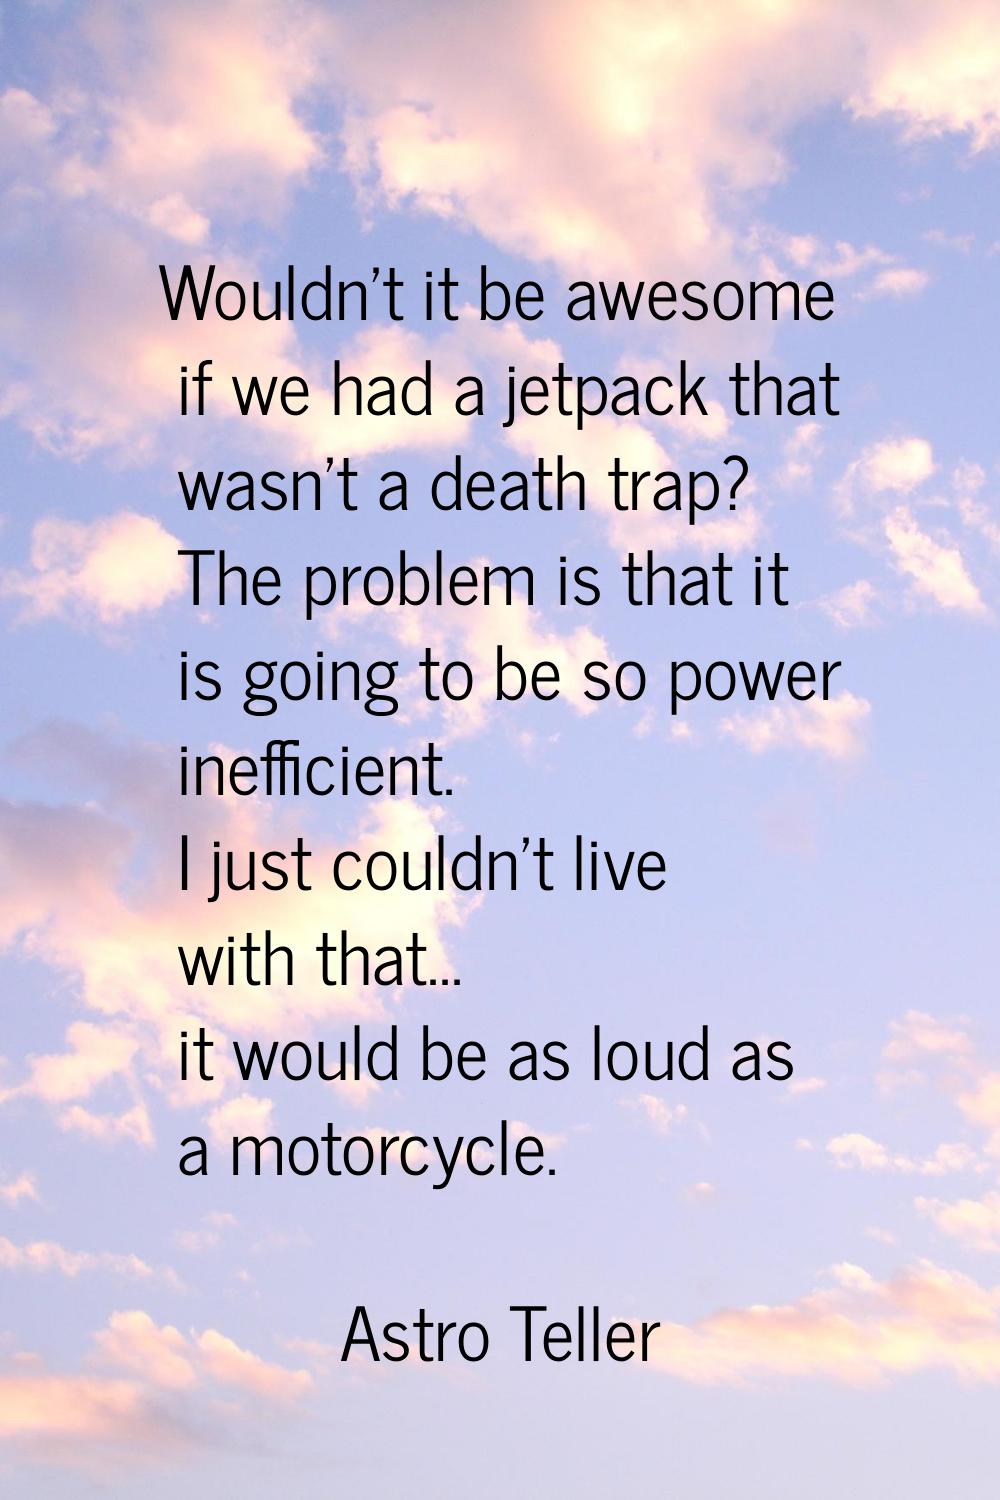 Wouldn't it be awesome if we had a jetpack that wasn't a death trap? The problem is that it is goin